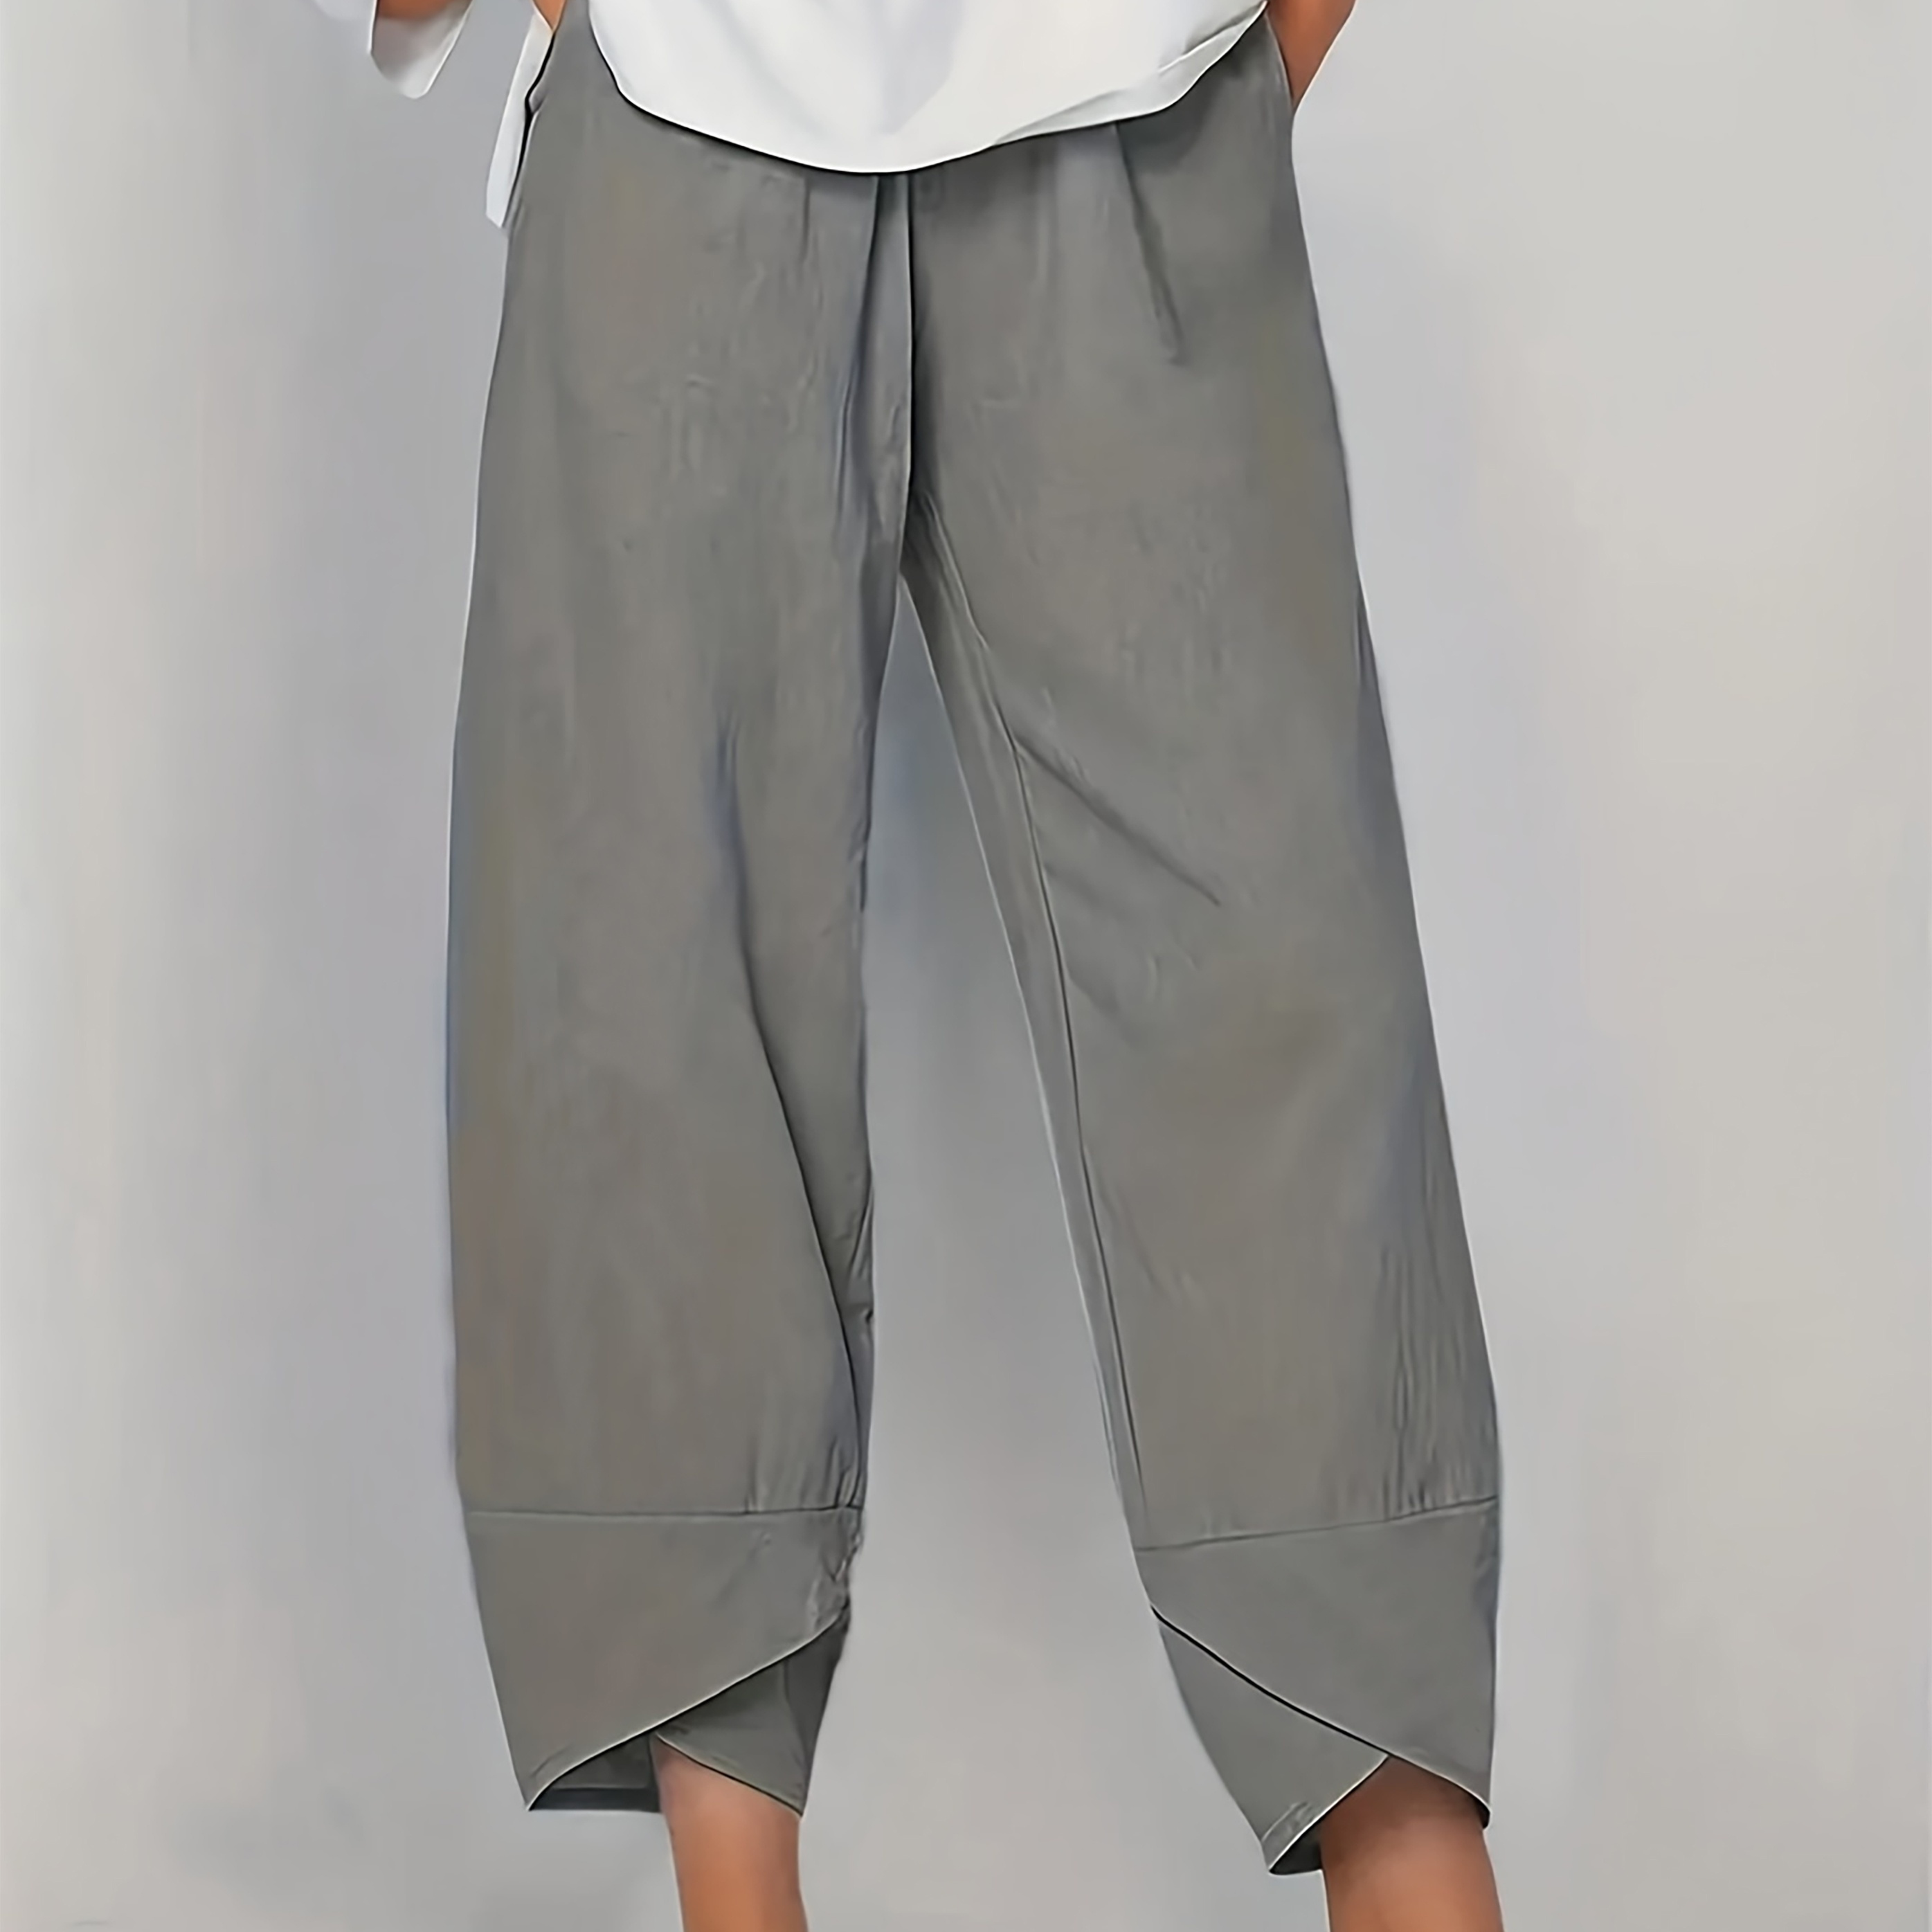 

Plus Size Solid Baggy Pants, Casual Elastic Waist Pants For Spring & Summer, Women's Plus Size Clothing